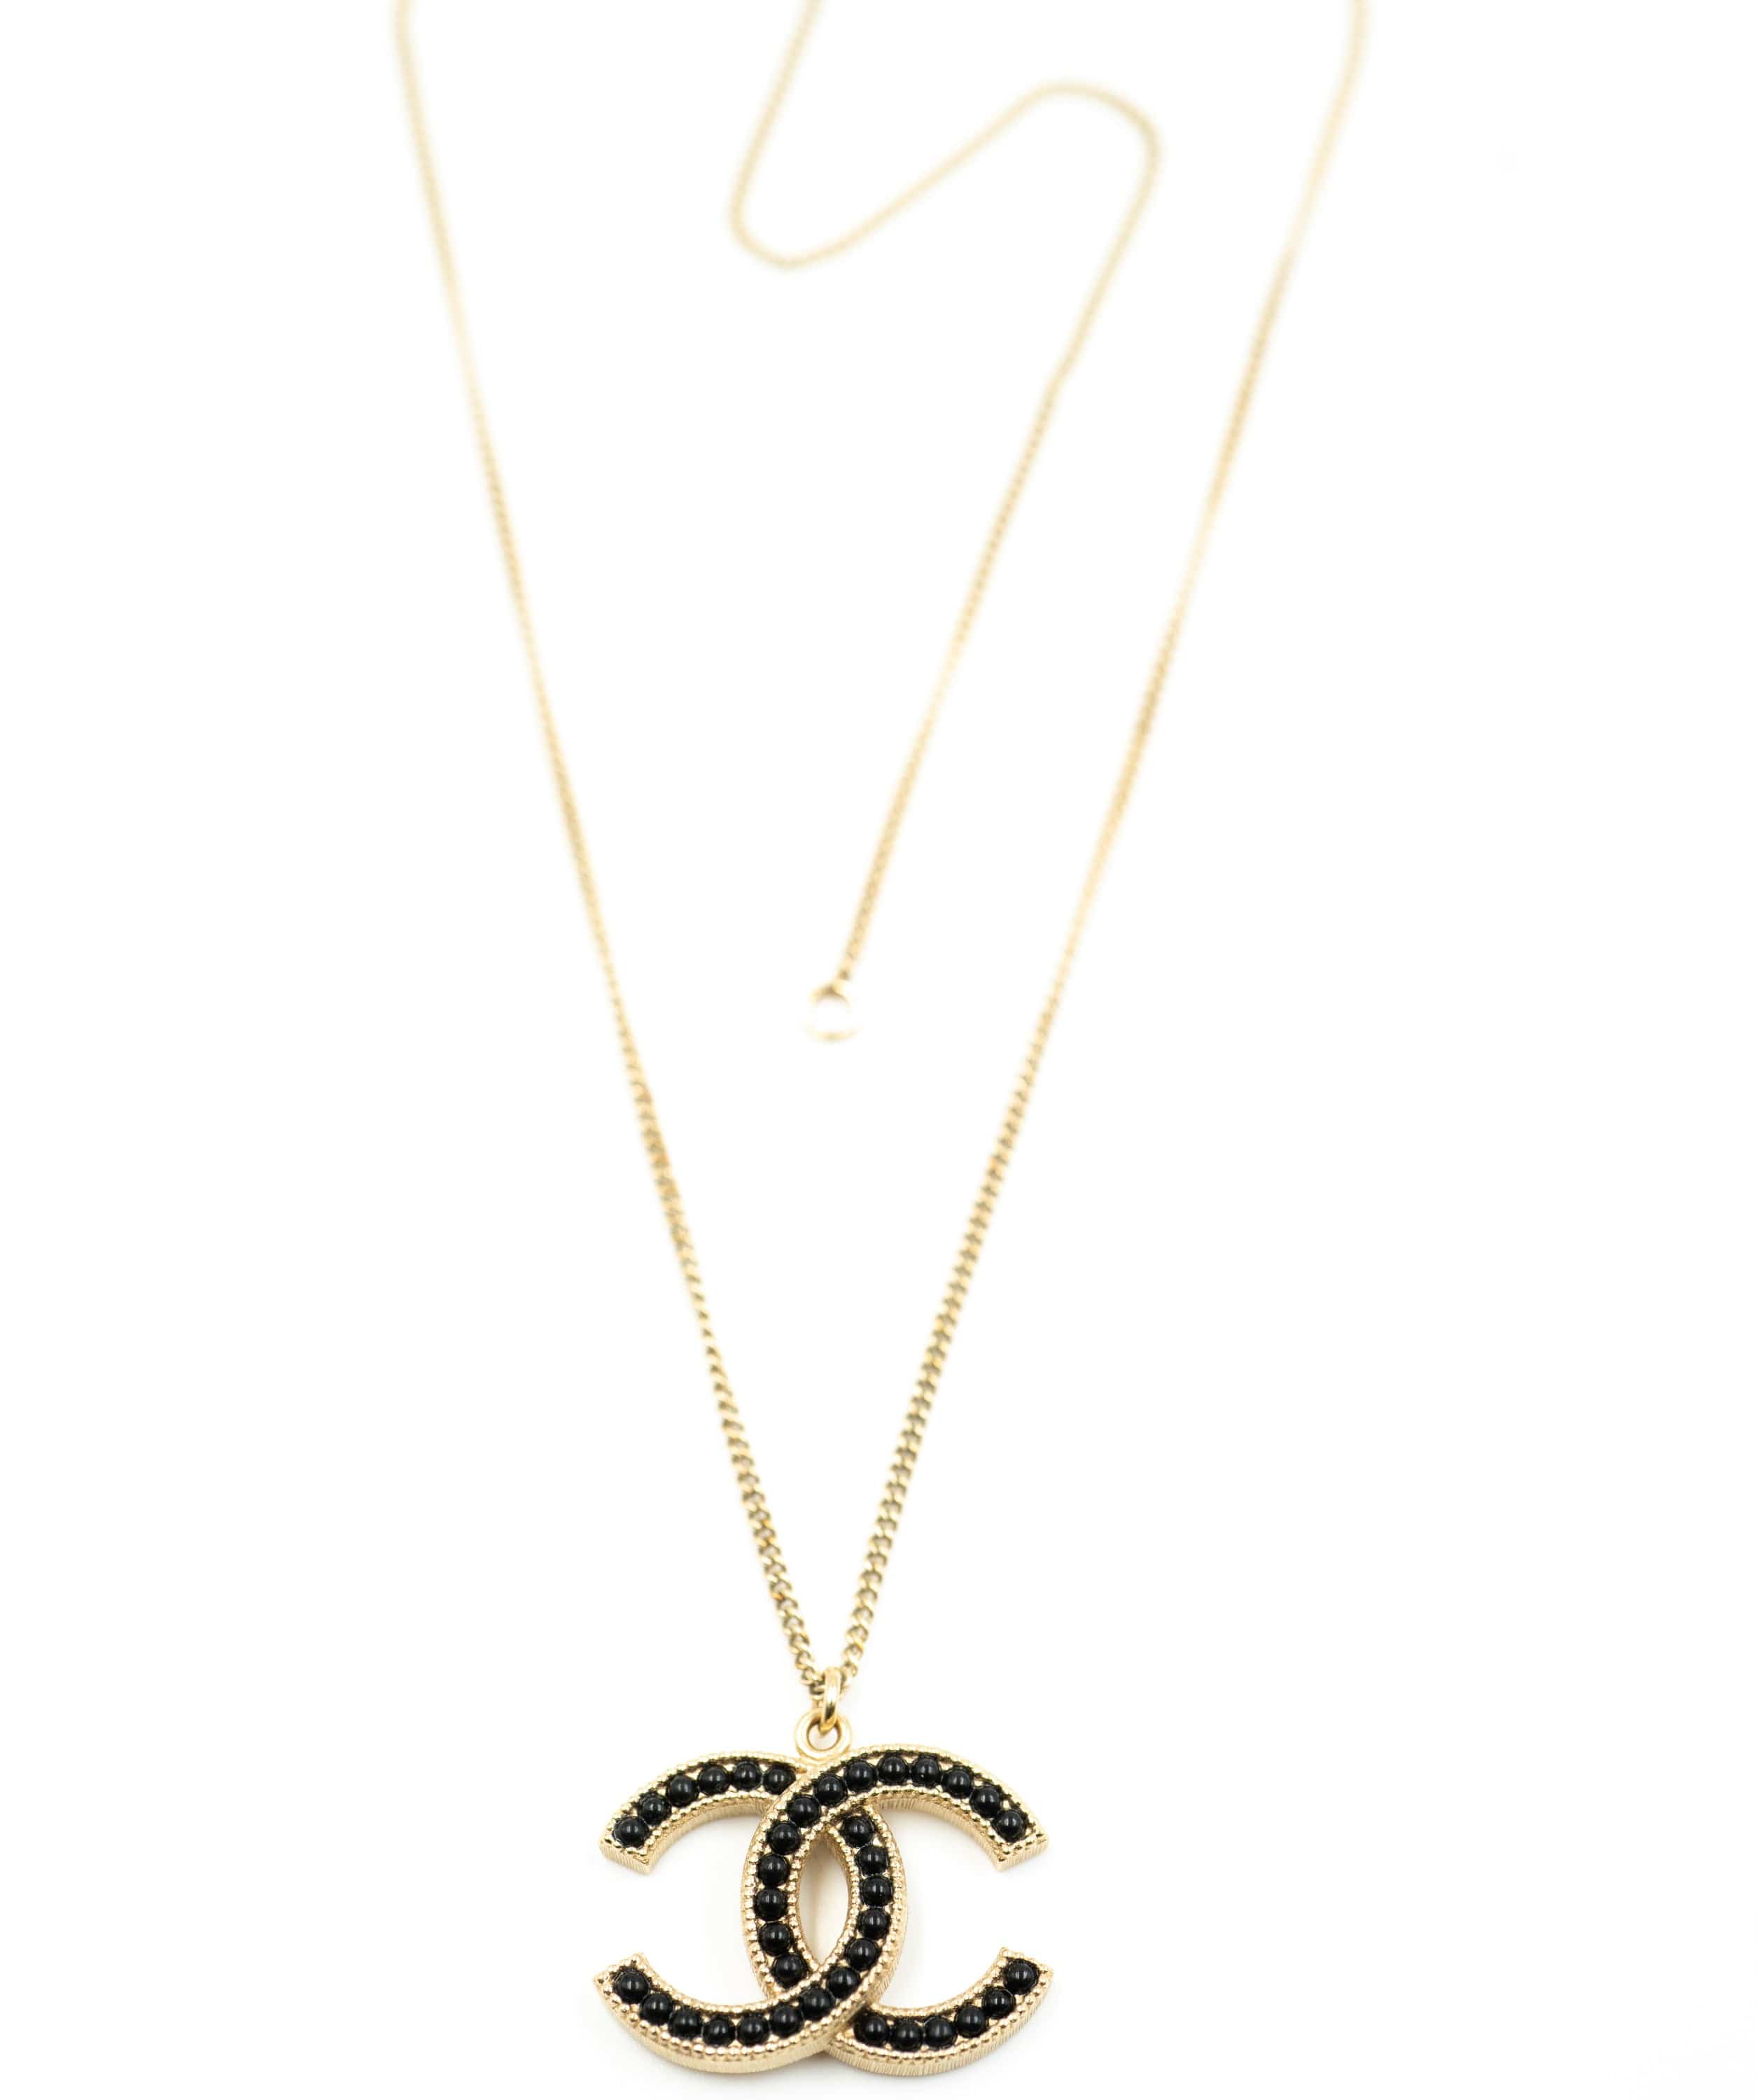 Chanel Chanel CC necklace with black stones - AWL3816